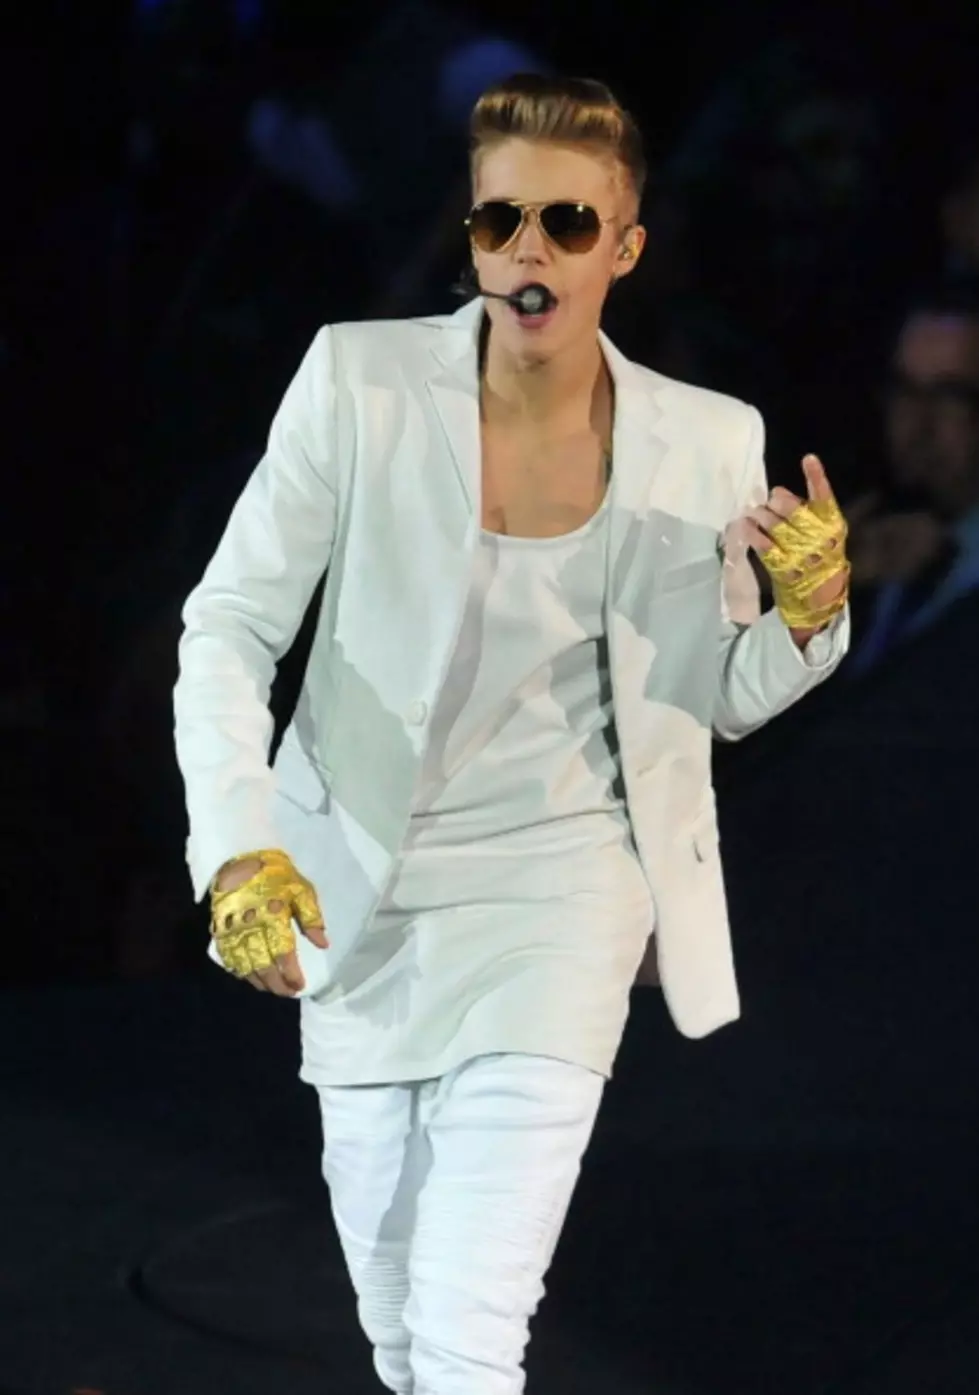 Justin Bieber Attacked on Stage in Dubai (Video)